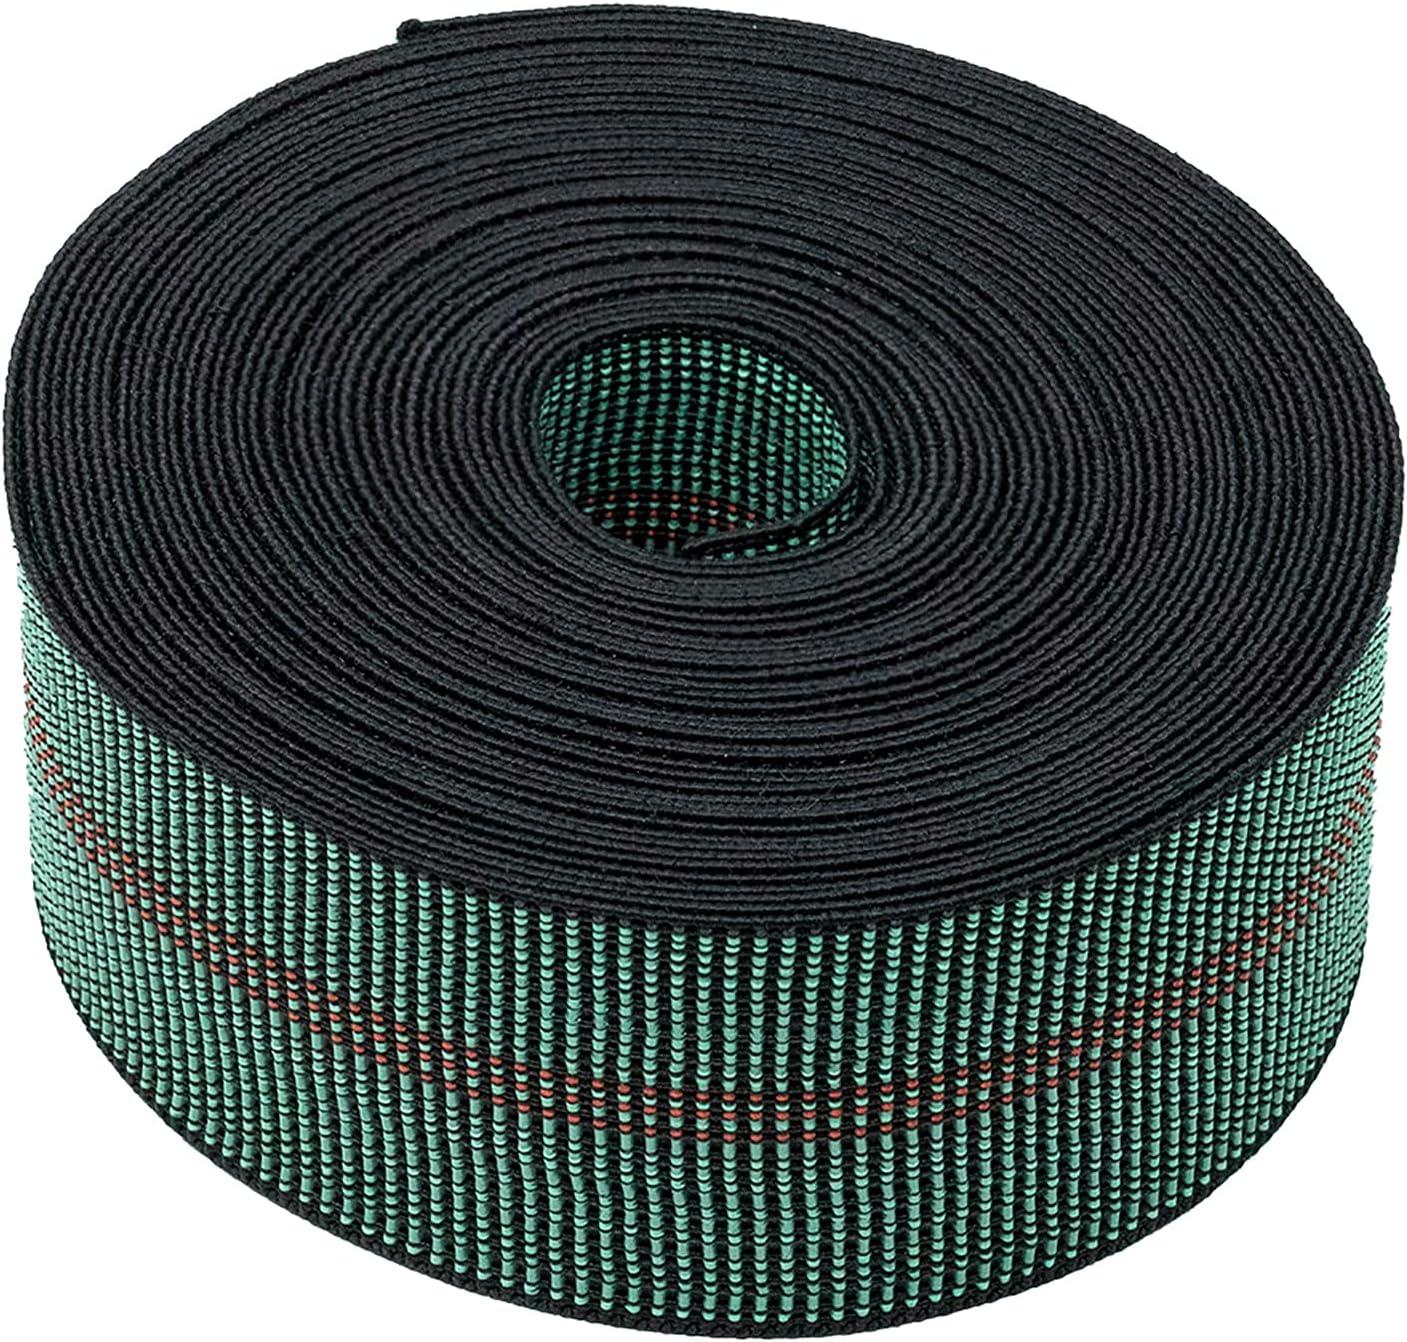 House2Home Webbing for Lawn Chairs and Furniture, Upholstery Webbing to ...